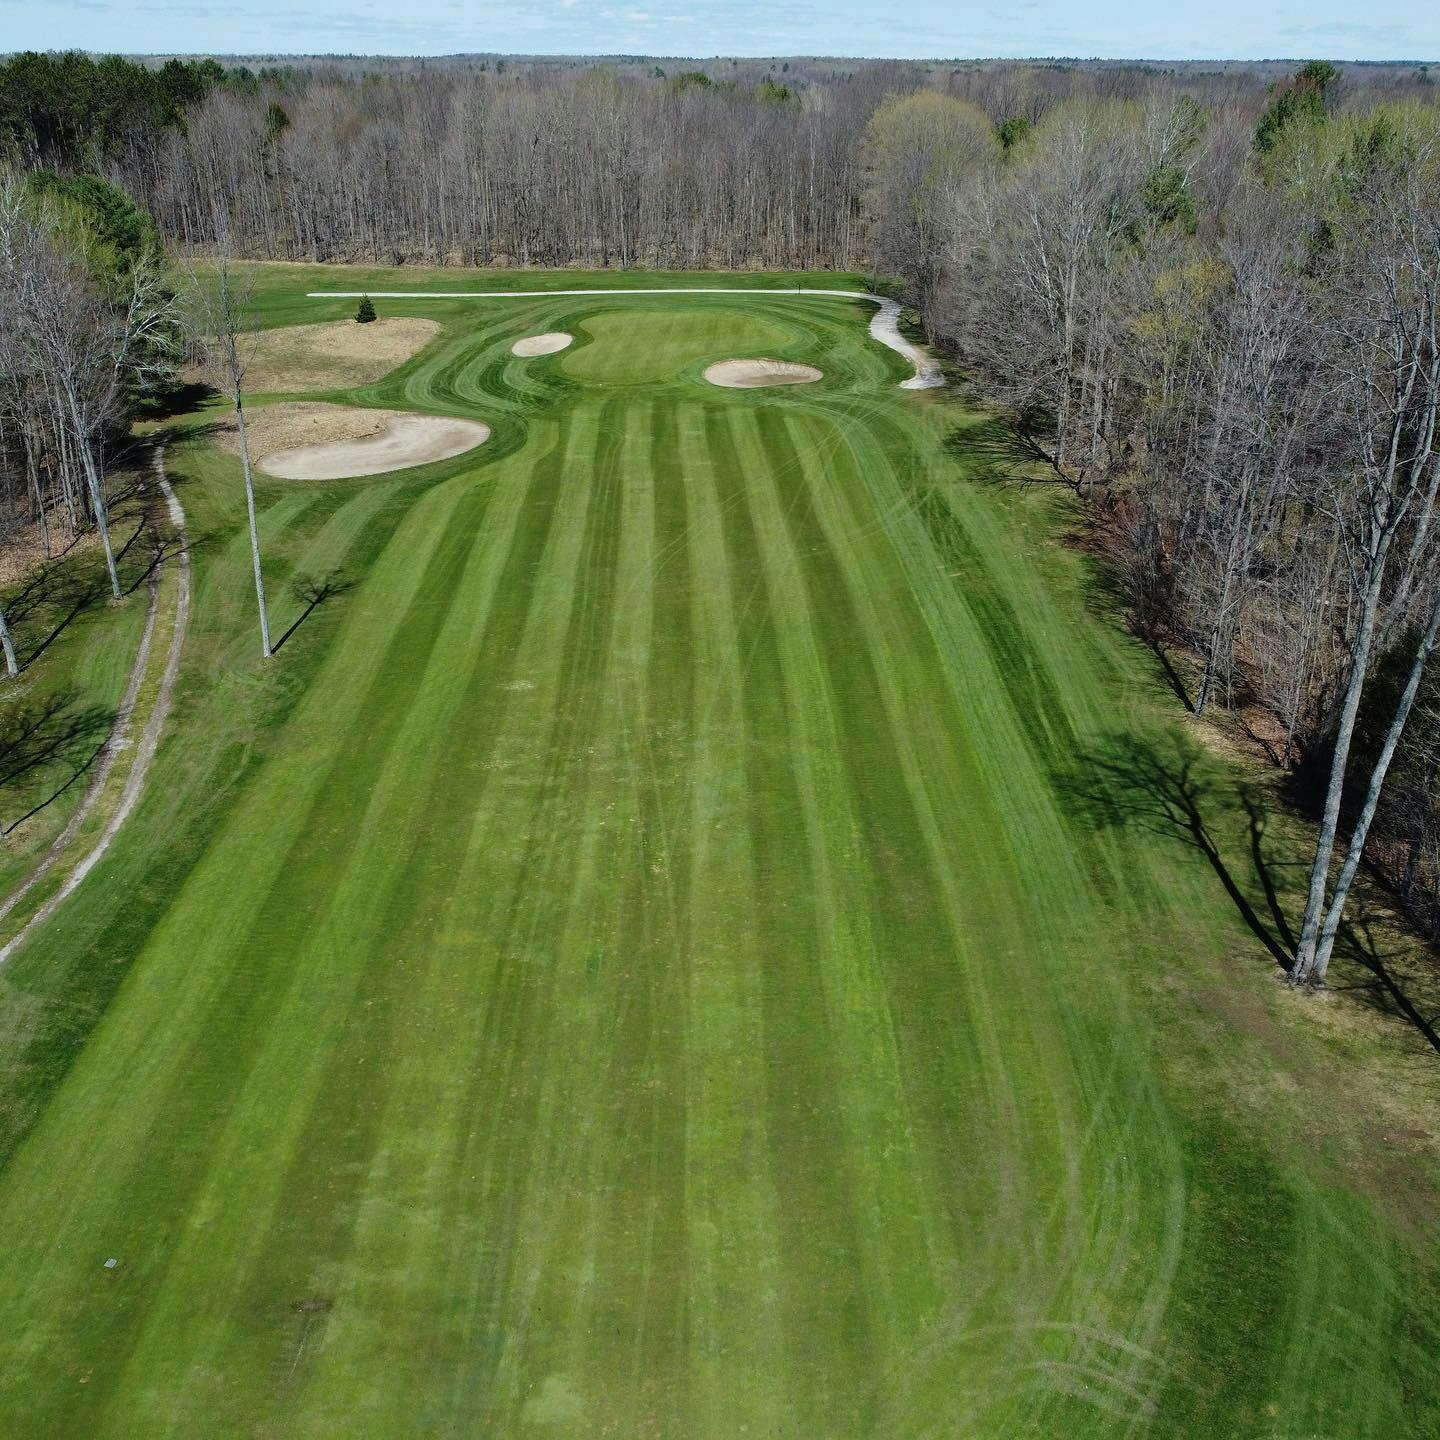 Some photos from April 27th last year. Spring golf is almost here! #PlayTheLake